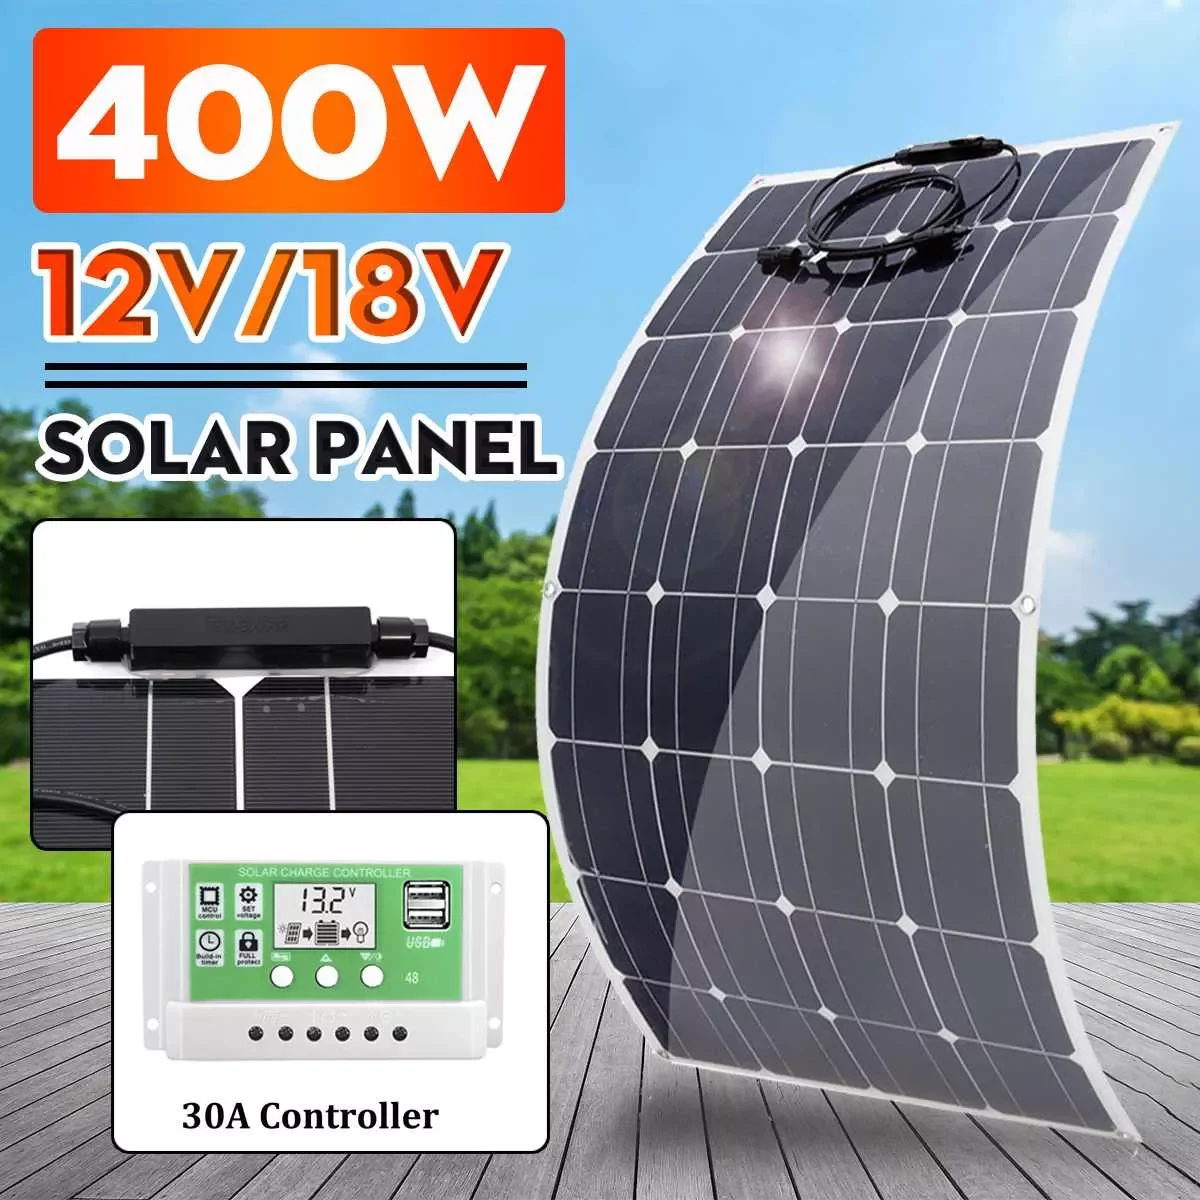 

400W Solar Panel 18V Semi-flexible Monocrystalline Solar Cell DIY Cable Rechargeable Power System Car Yacht RV Battery Charger